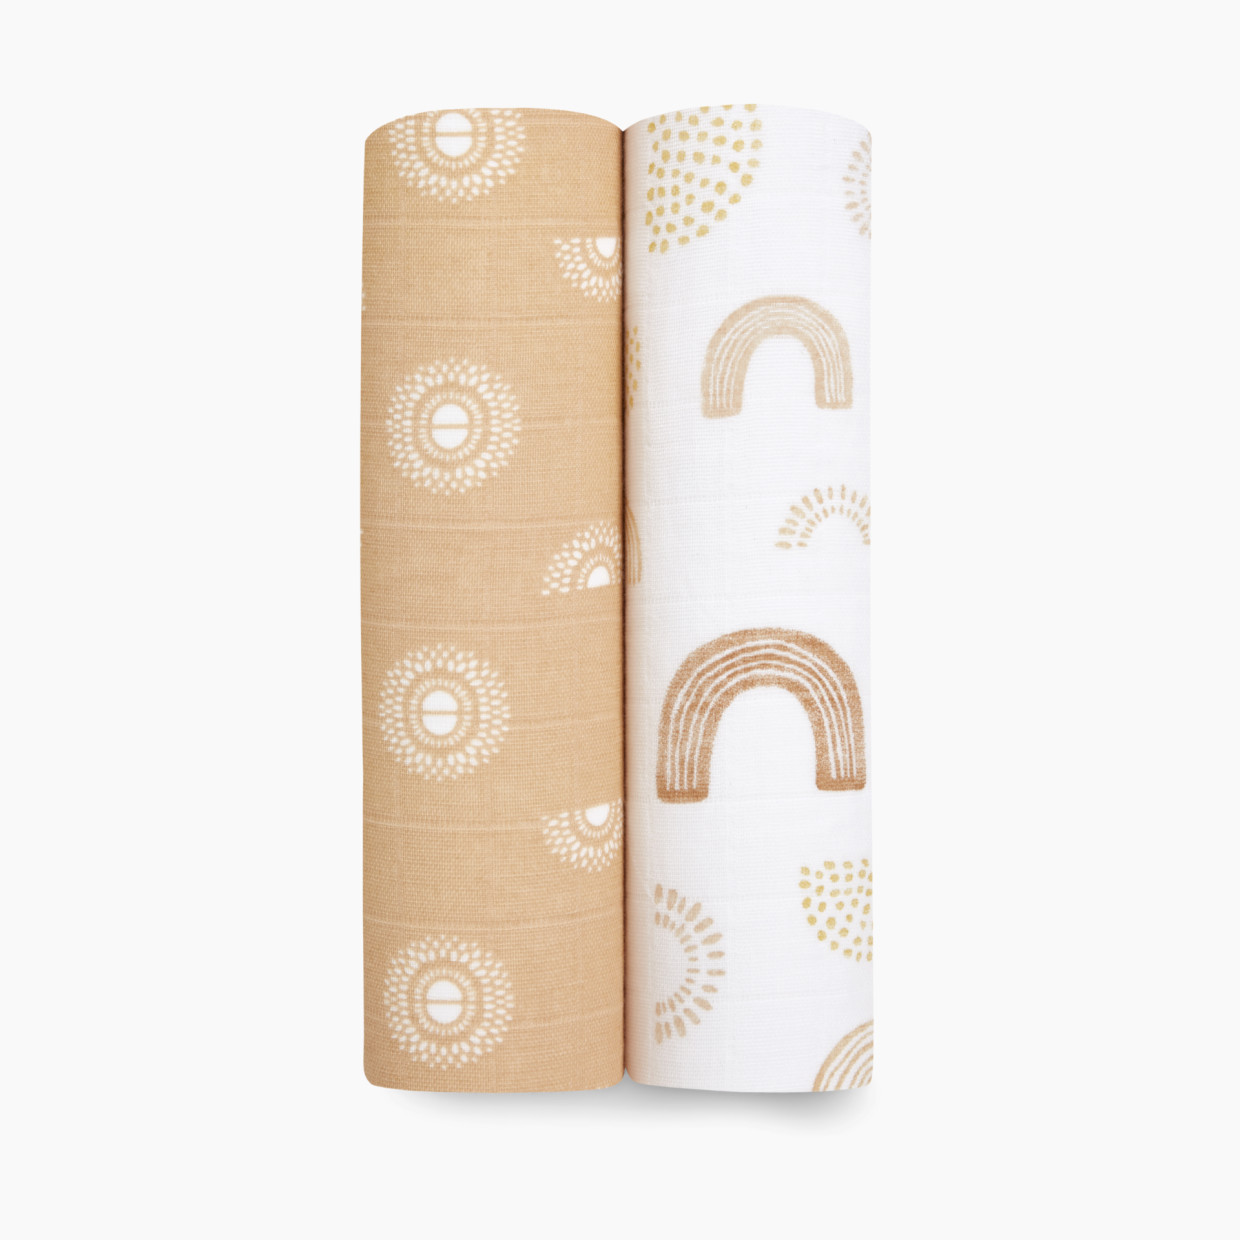 Aden + Anais Classic Cotton Muslin Swaddles (2 Pack) - Keep Rising.